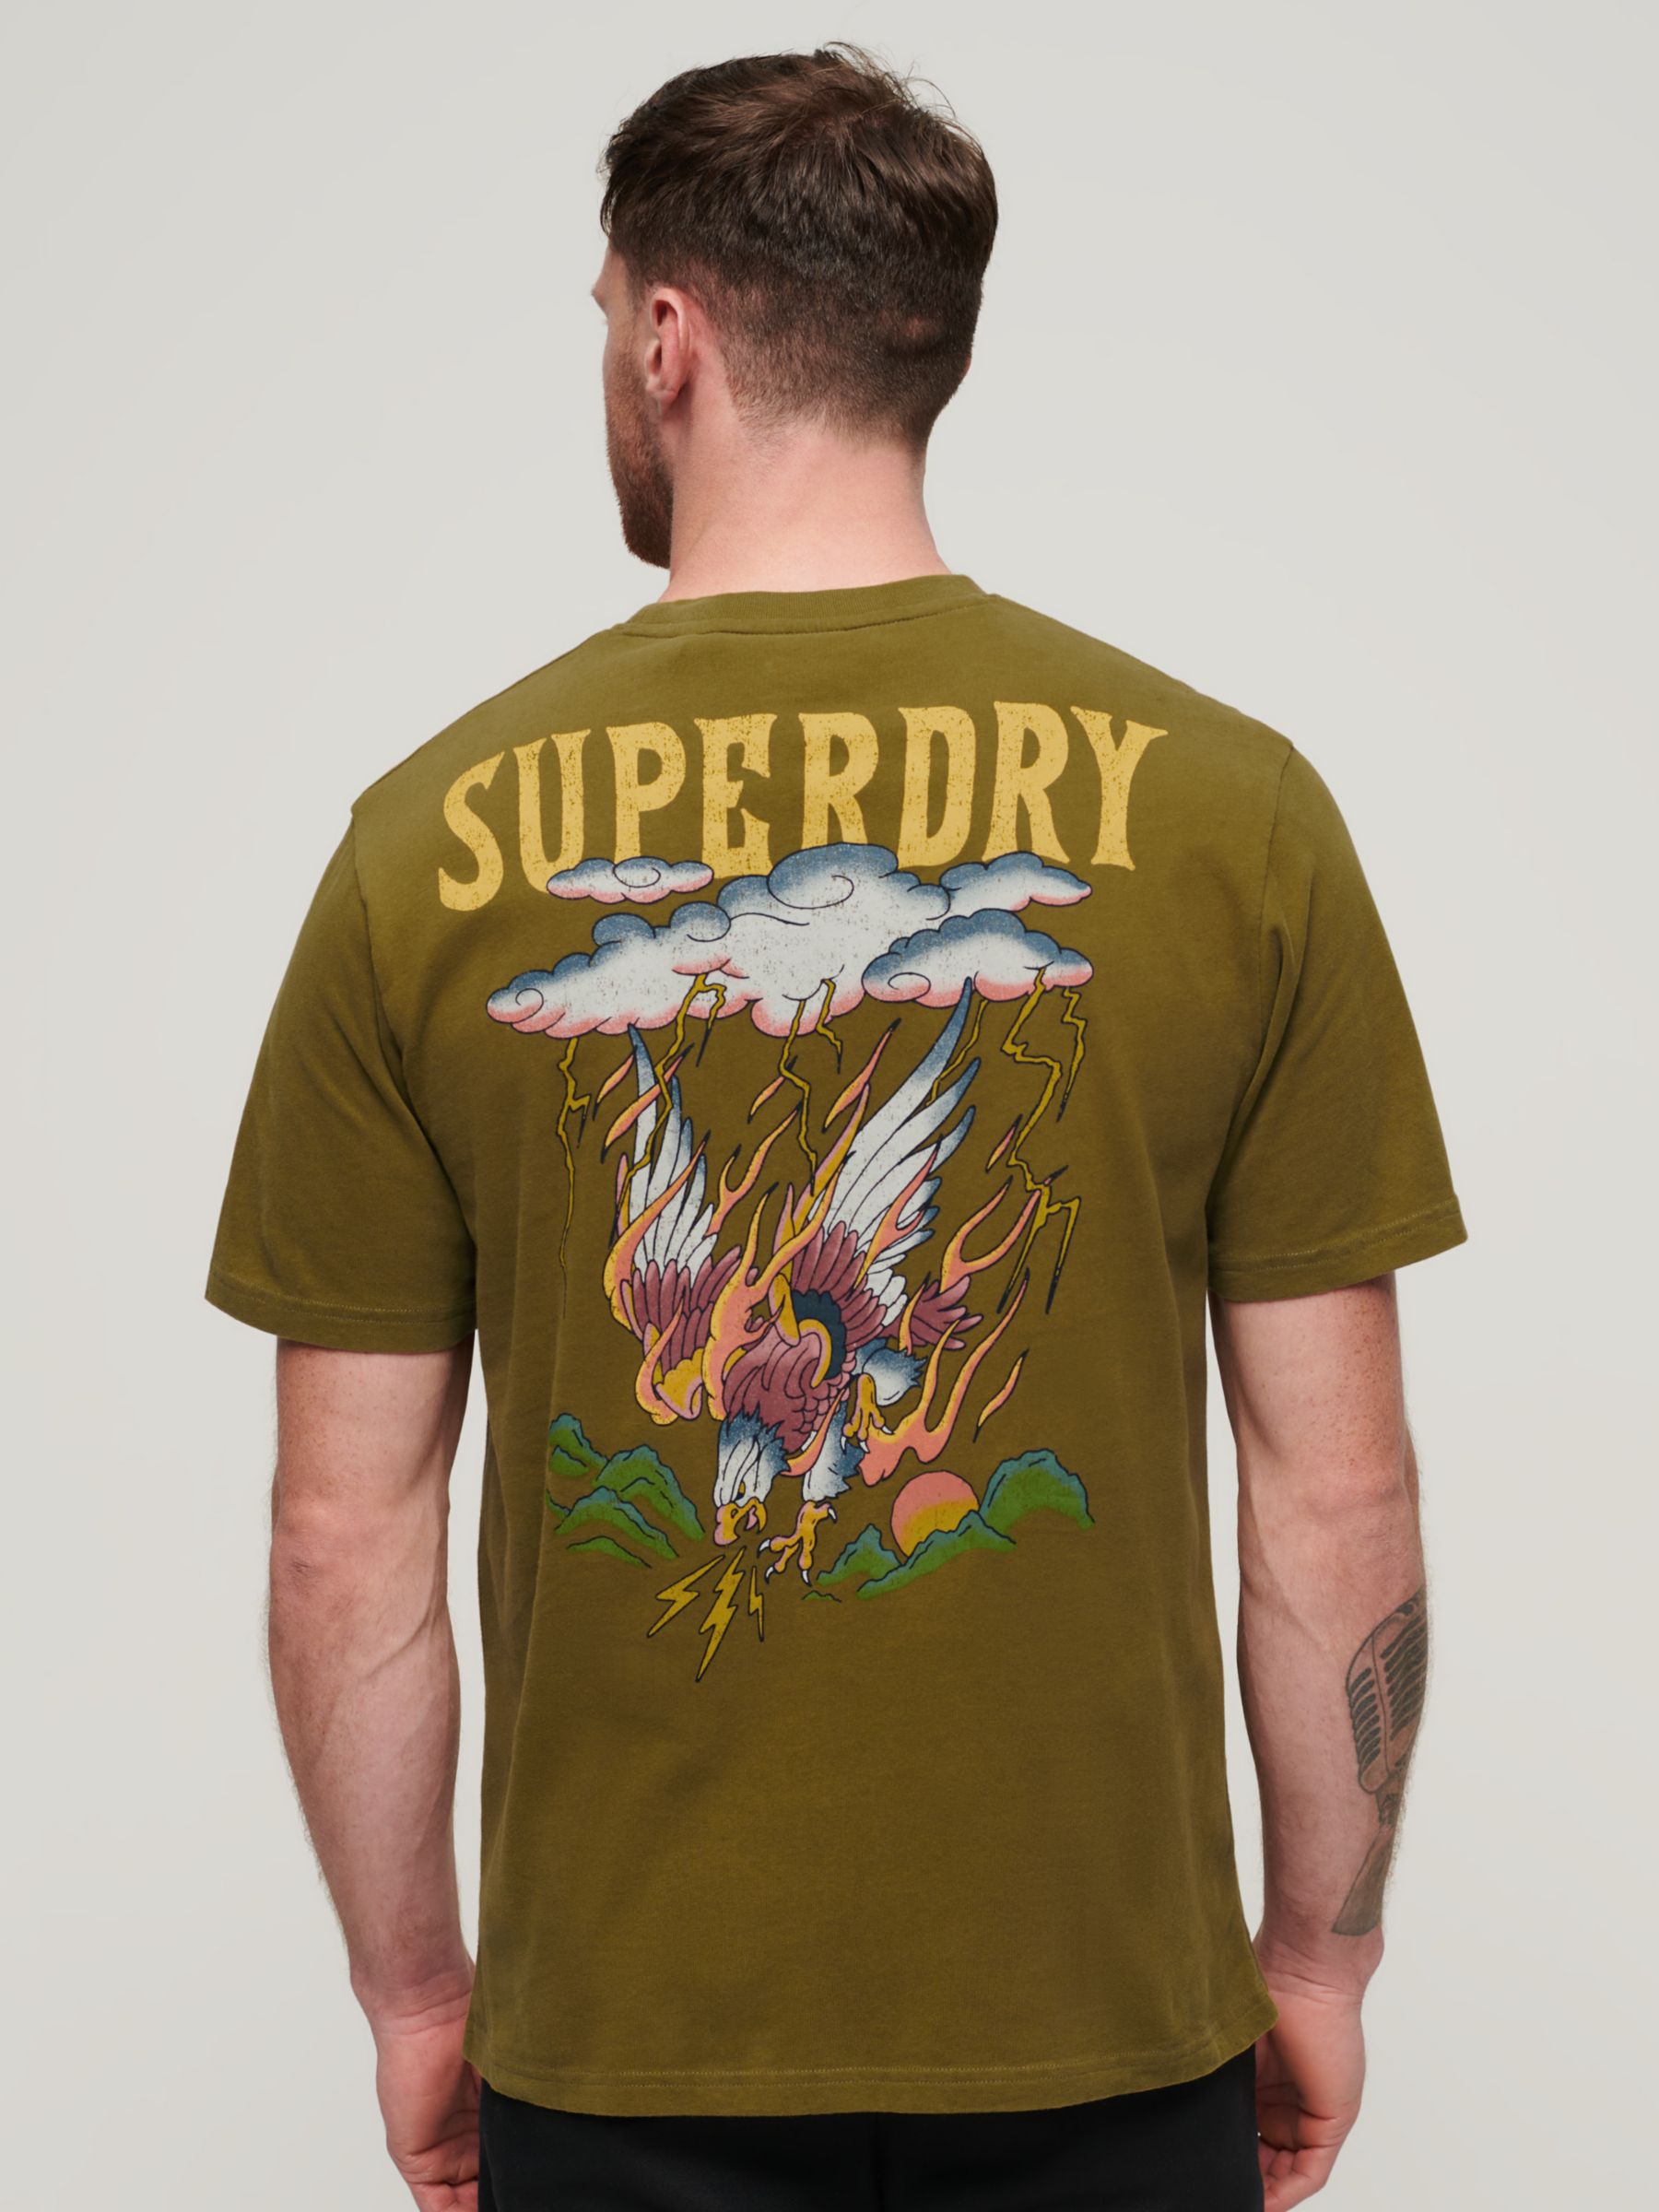 Buy Superdry Tattoo Graphic Loose Fit T-Shirt Online at johnlewis.com